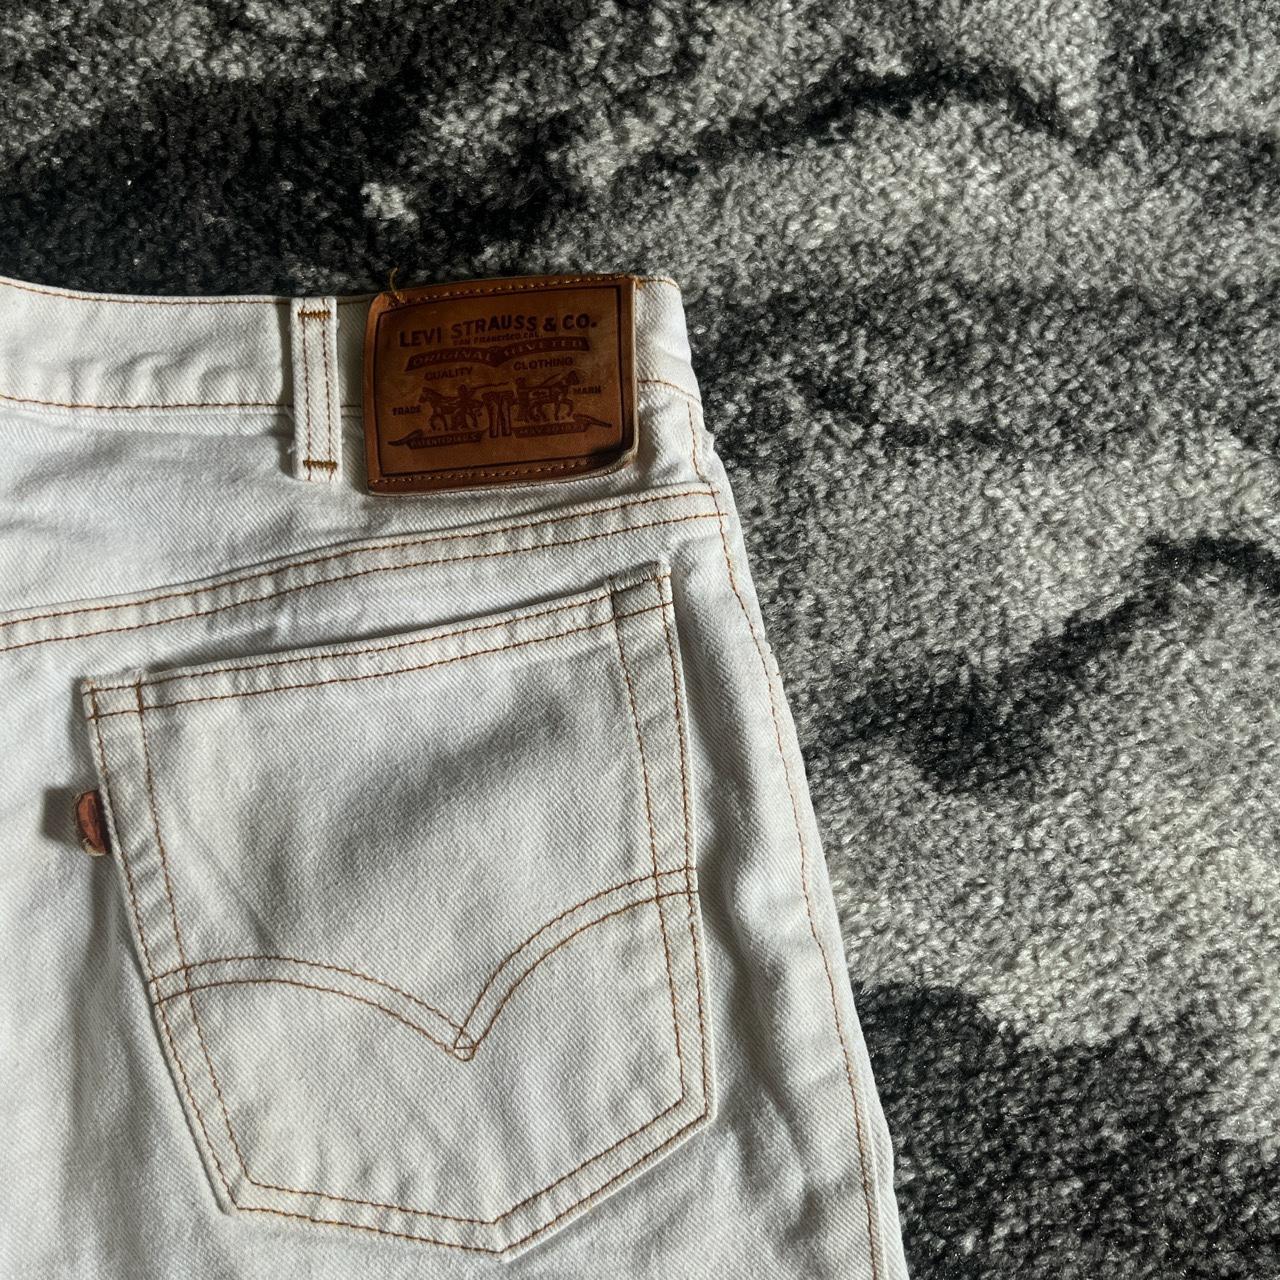 Vintage Levi’s Jeans Leather Patch & Tab Staining... - Depop